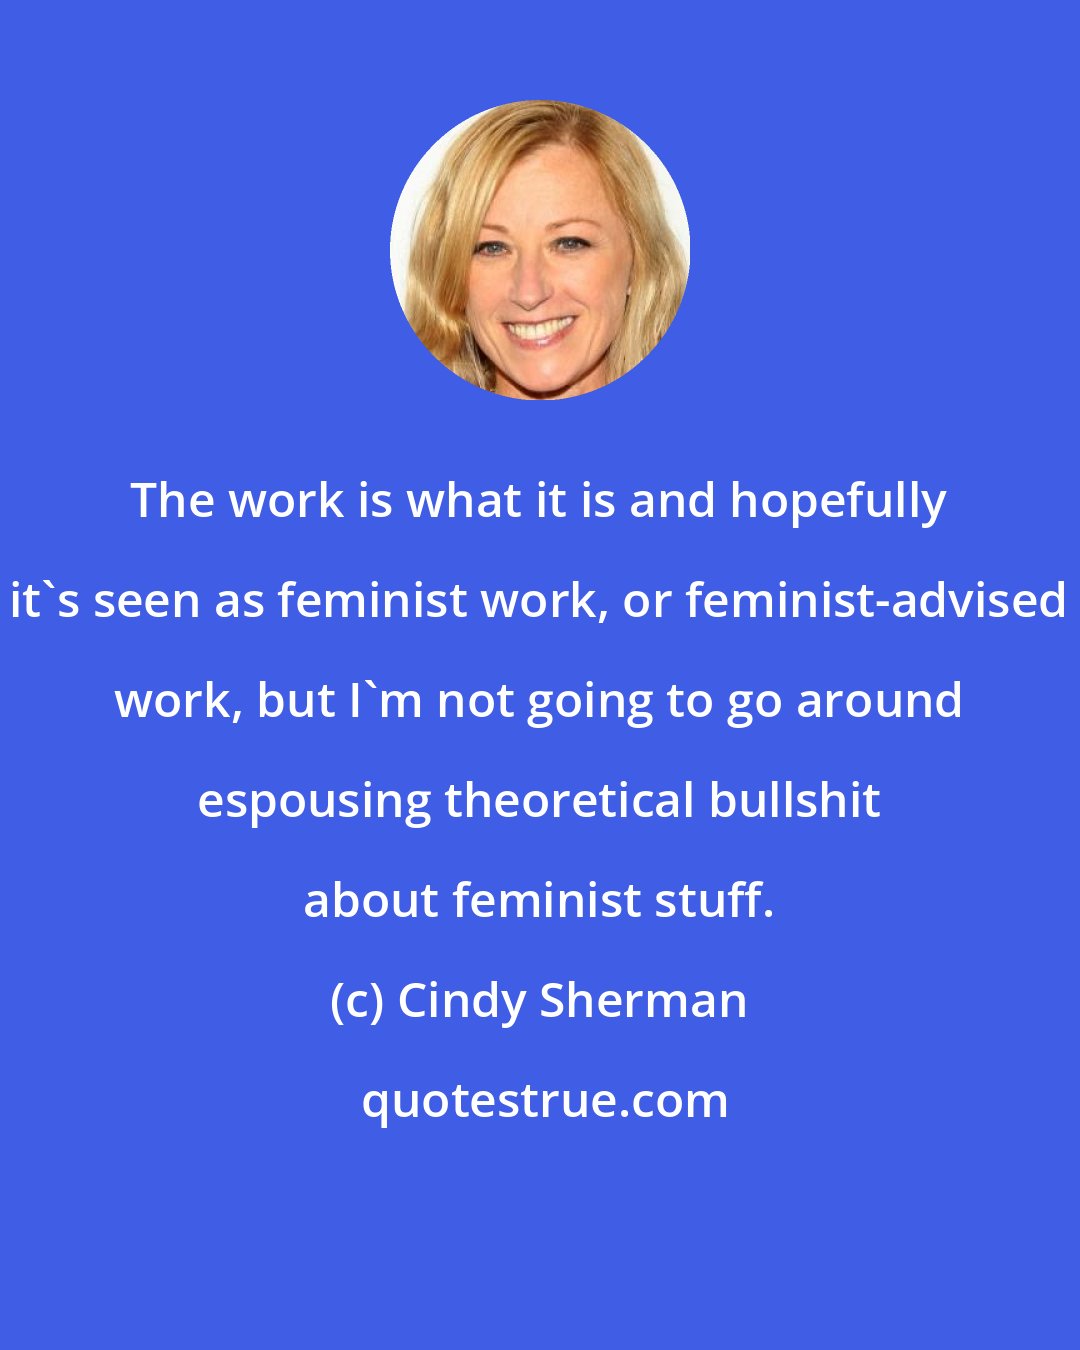 Cindy Sherman: The work is what it is and hopefully it's seen as feminist work, or feminist-advised work, but I'm not going to go around espousing theoretical bullshit about feminist stuff.